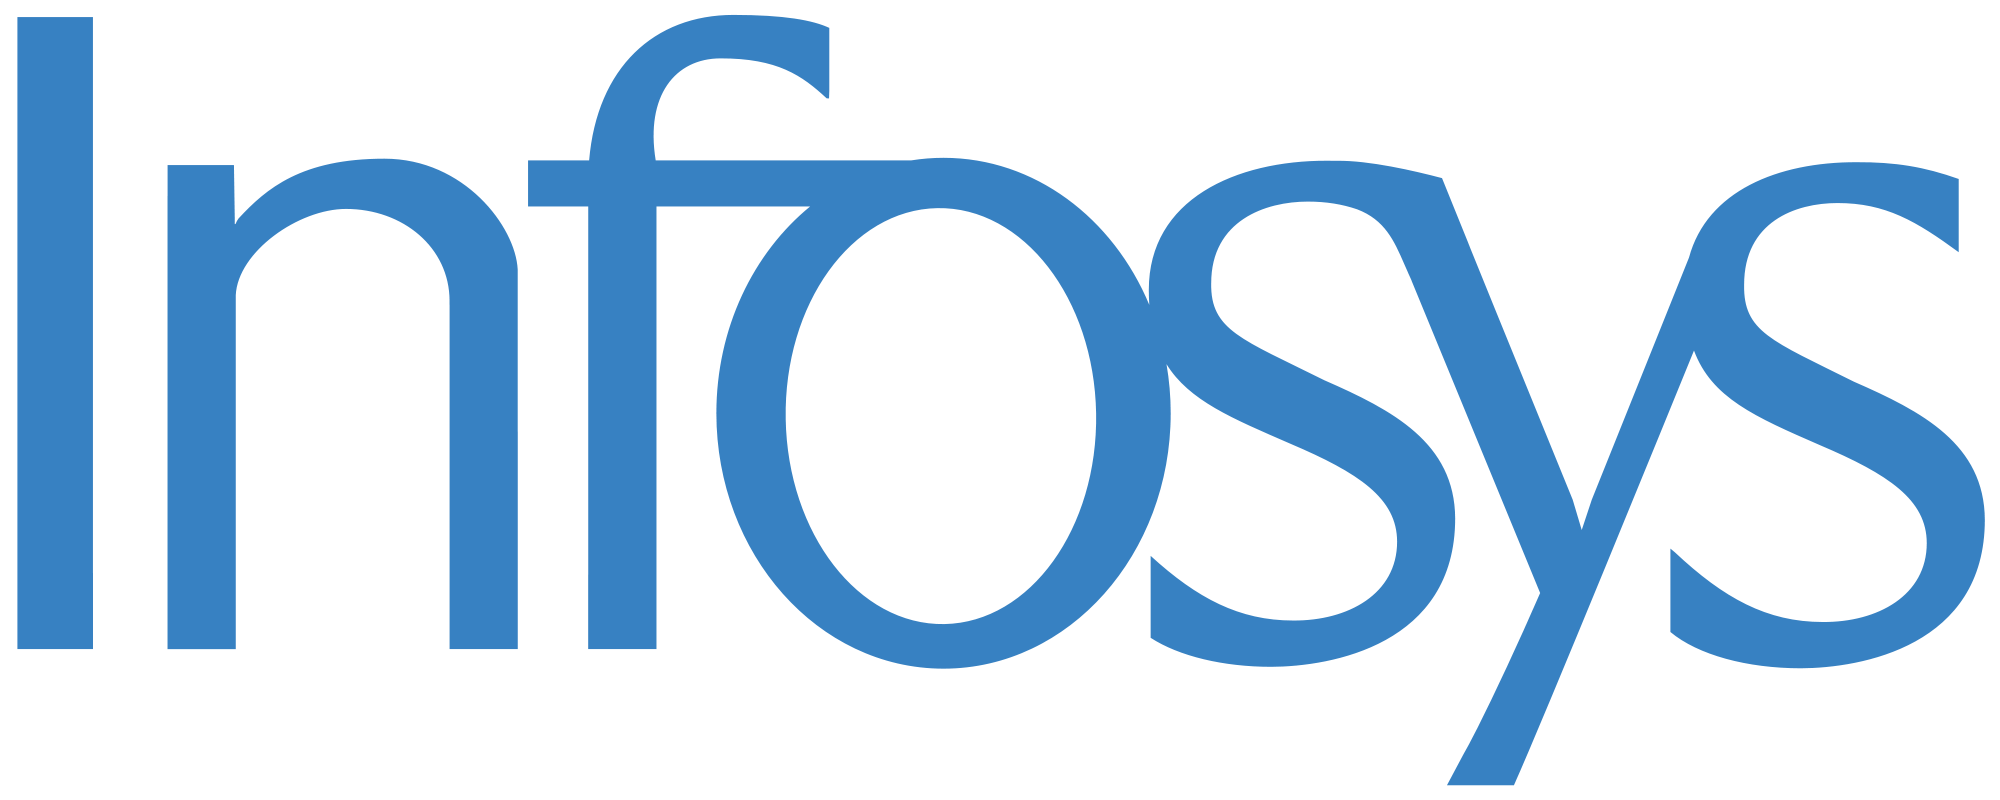 Infosys Named IT Services Provider of the Year by Frost & Sullivan